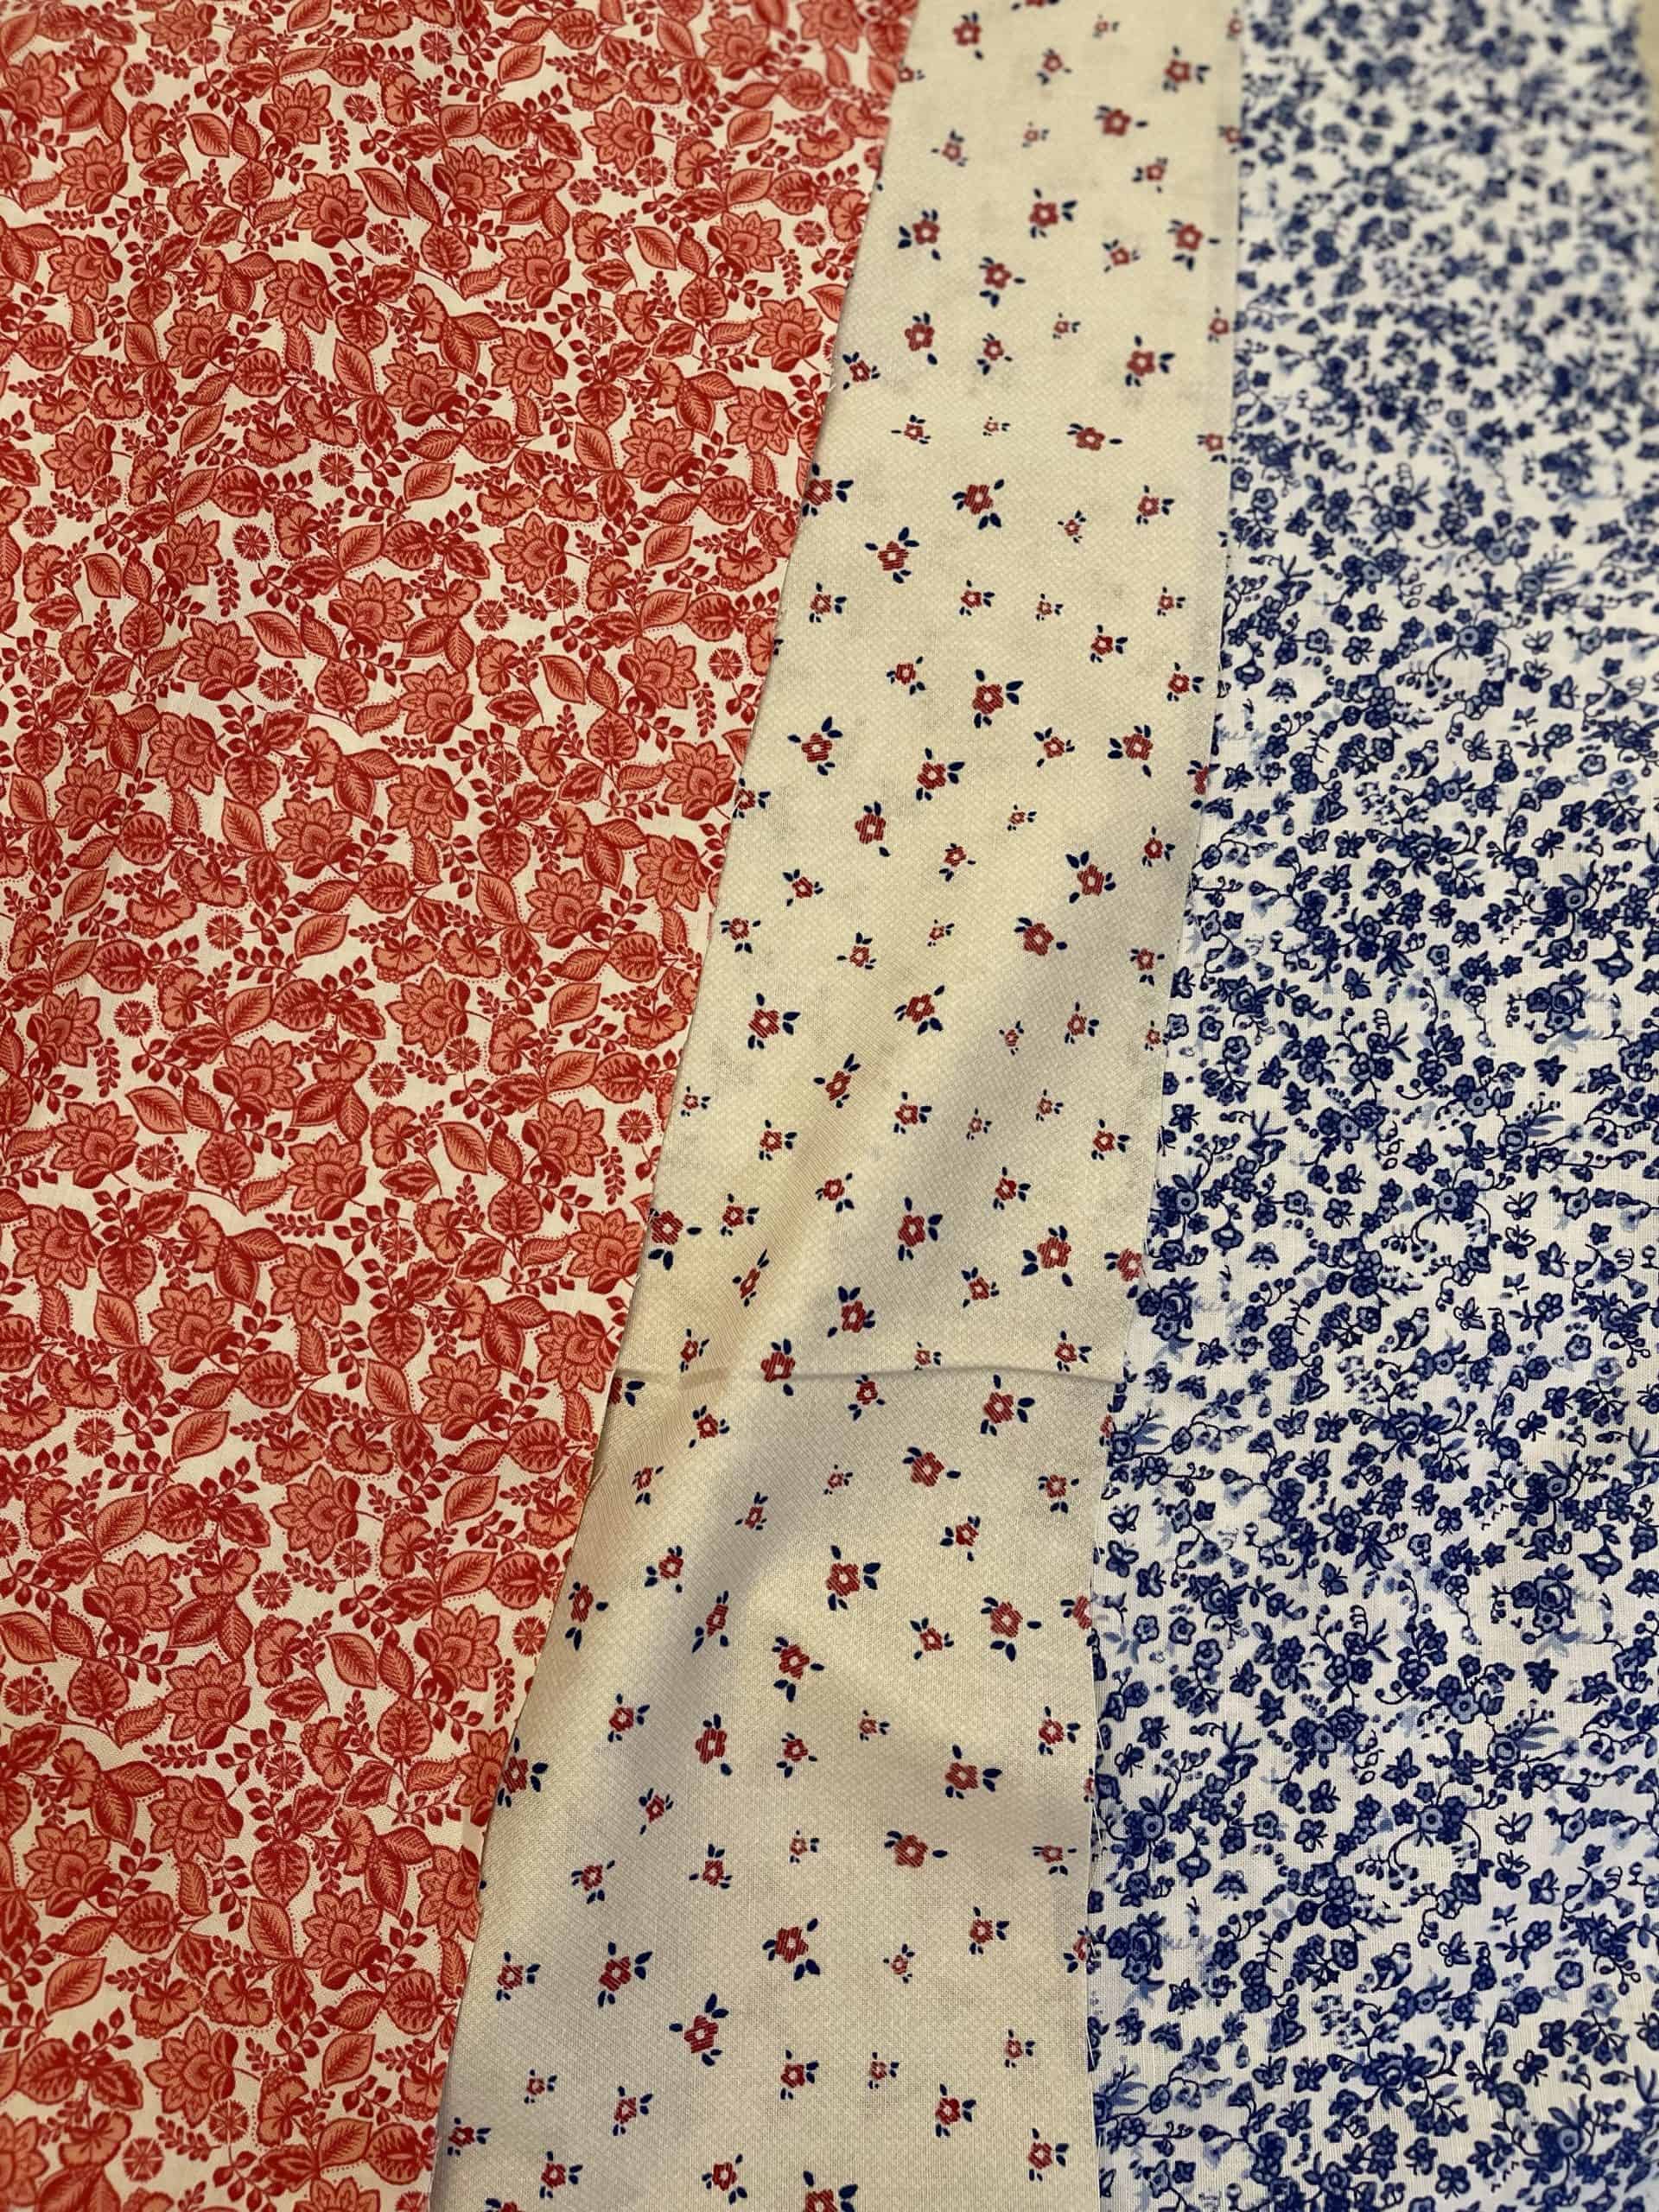 red white and blue floral fabric